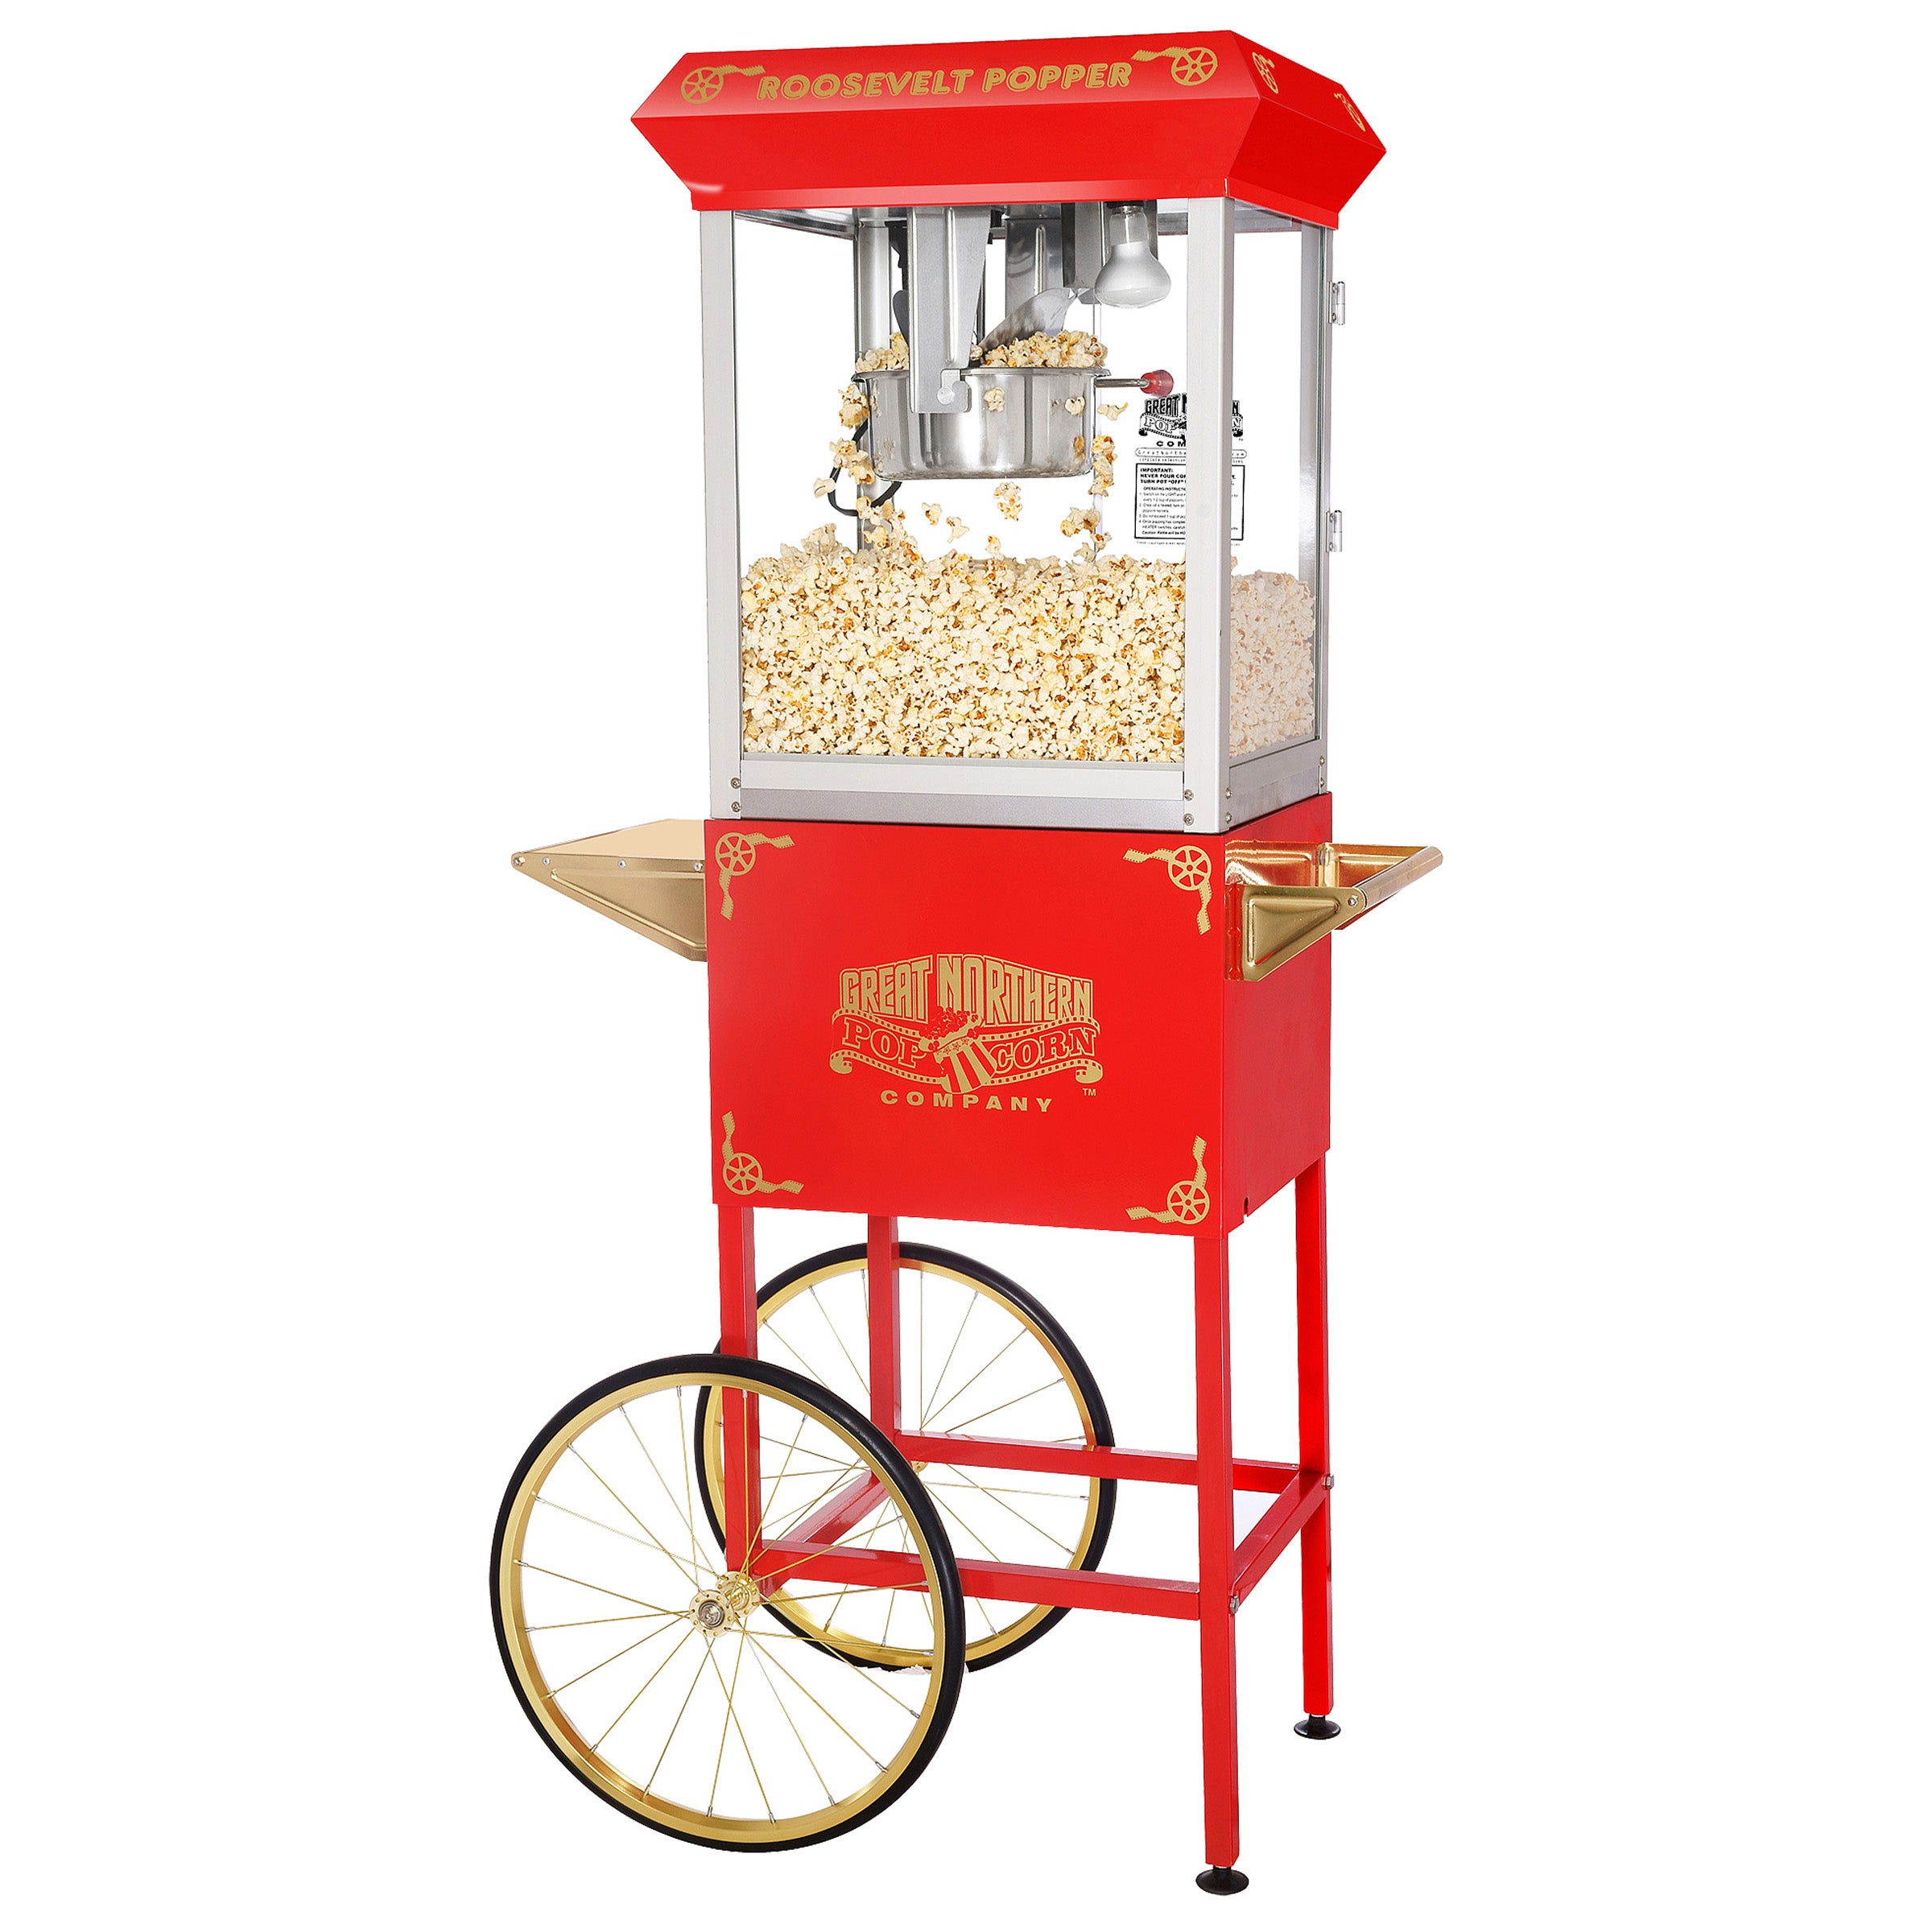 RIEDHOFF Commercial Popcorn Machine with Stand - Professional Cart Popcorn  Maker Machine With 8 Oz Kettle Makes Up to 60 Cups, With Lockers for Home